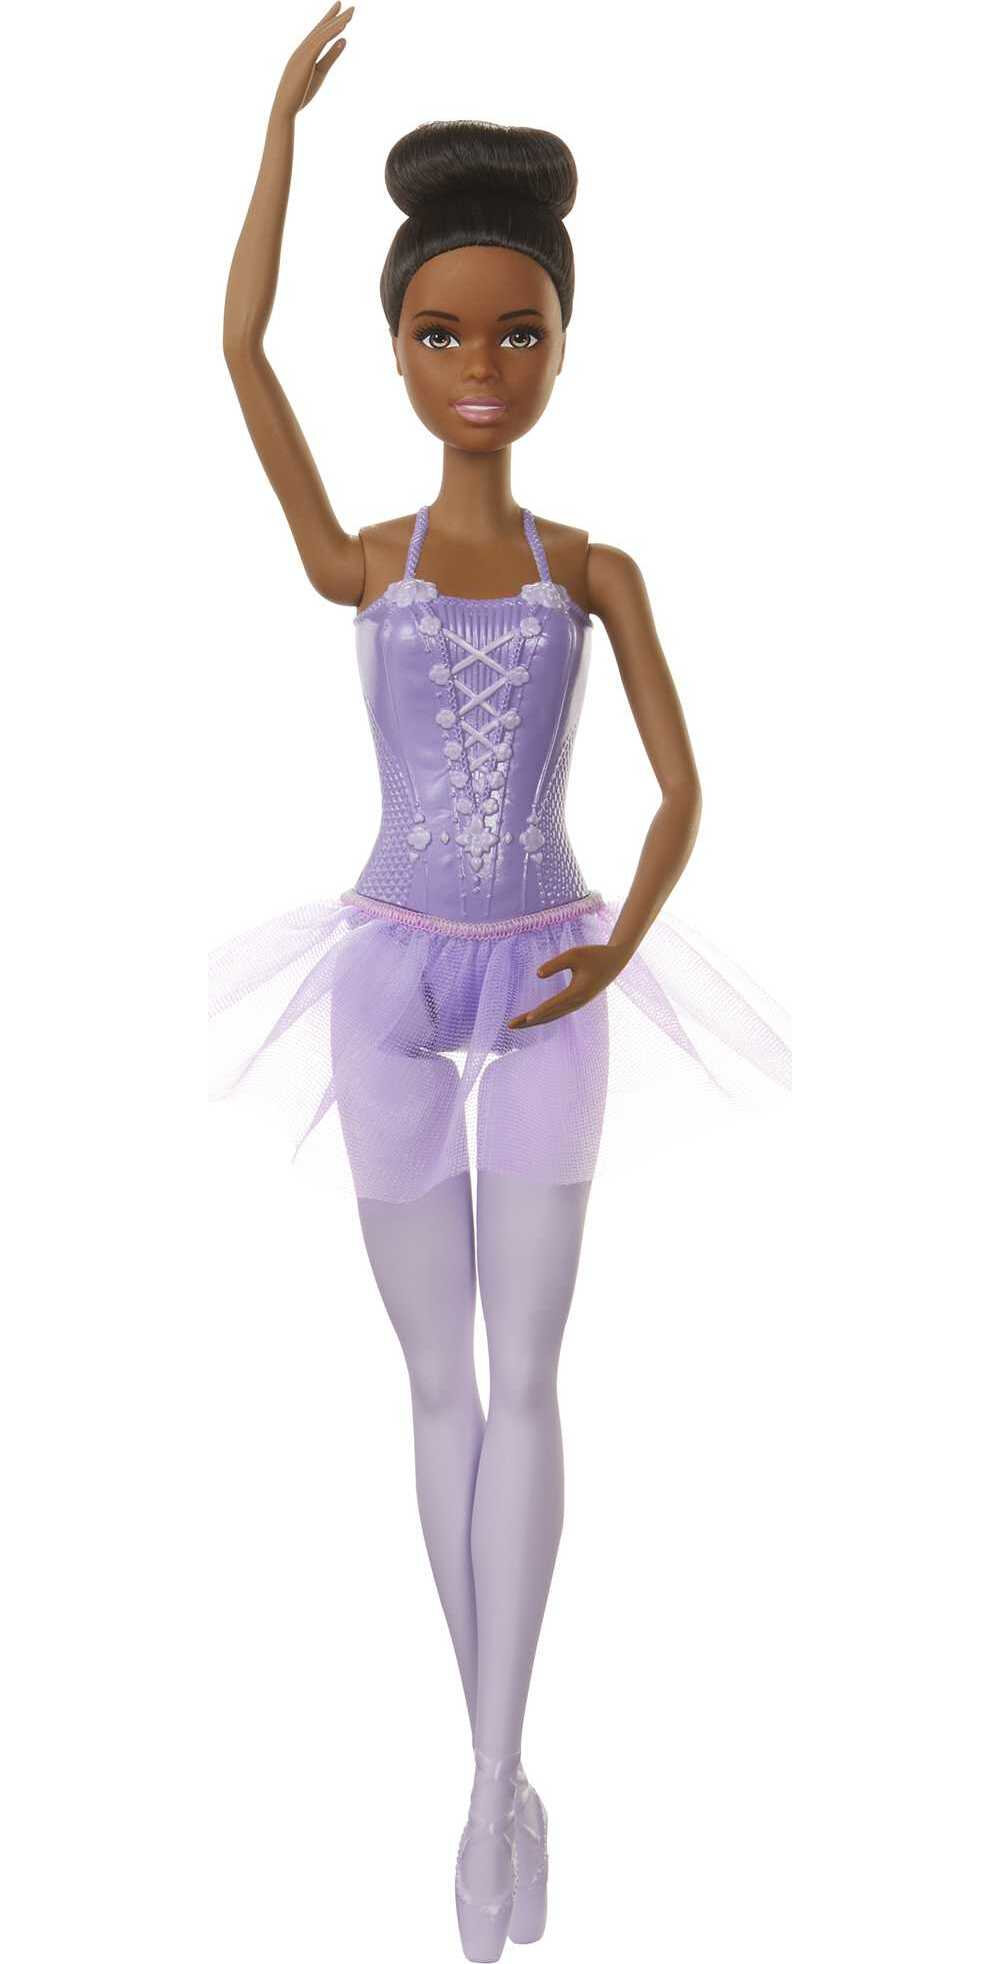 Barbie Ballerina Doll in Purple Tutu with Black Hair, Brown Eyes, Ballet Arms & Sculpted Toe Shoes - image 5 of 6